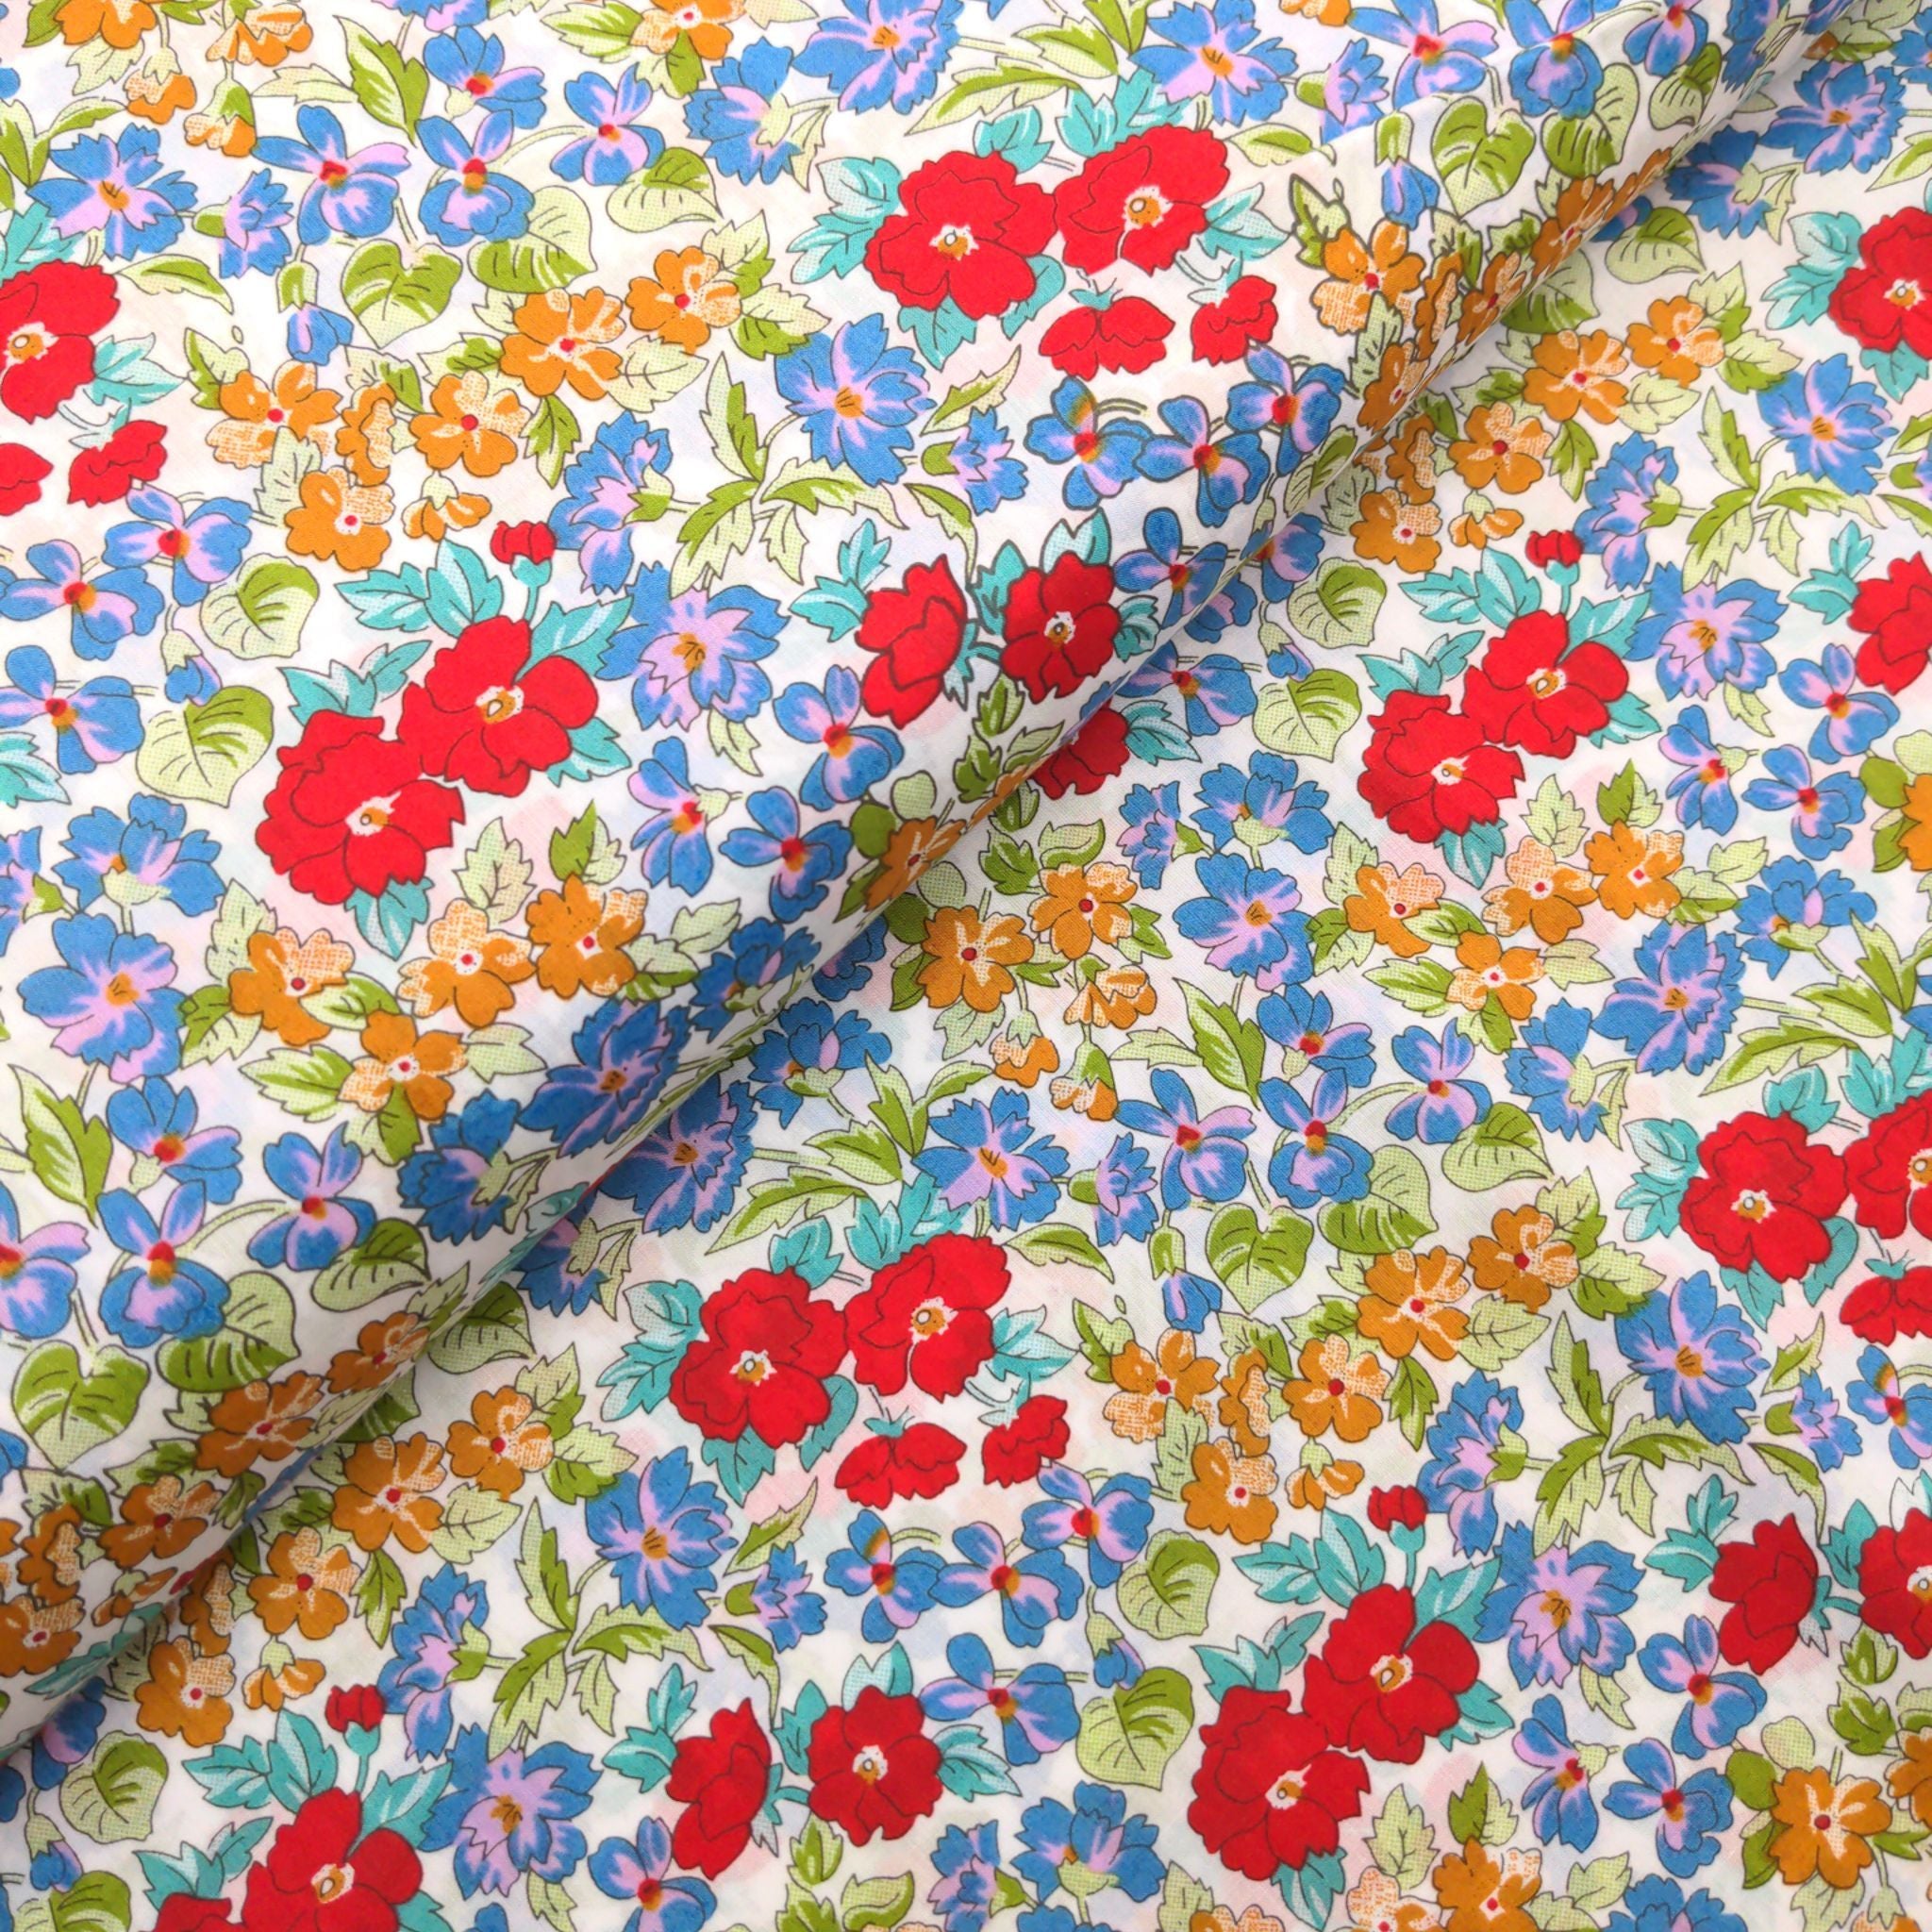 Cotton lawn fabric with red, blue and yellow flowers - Peter Horton